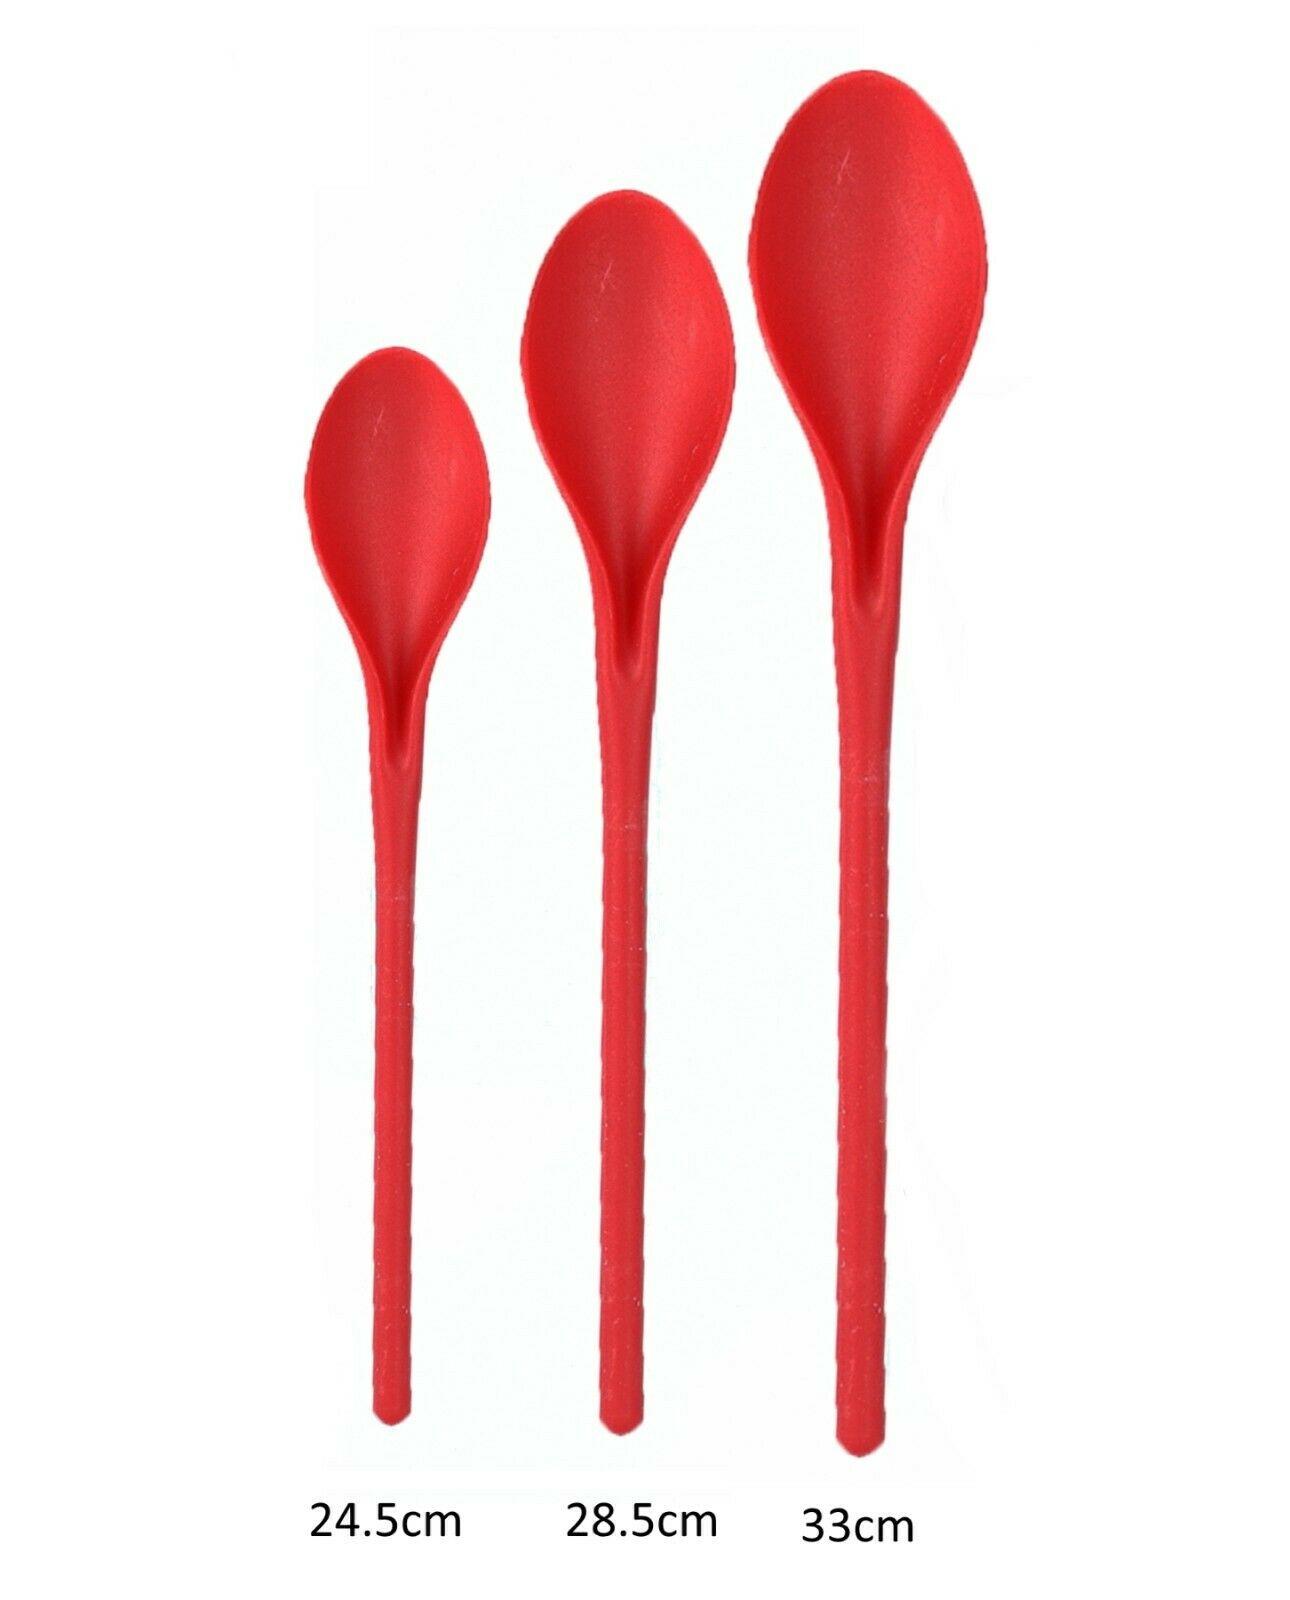 Plastic Oval Kitchen Spoon Set 3-Piece Hard Plastic Mixing Stirring Spoons Long Handle Cooking Serving Spoons Utensils Red 